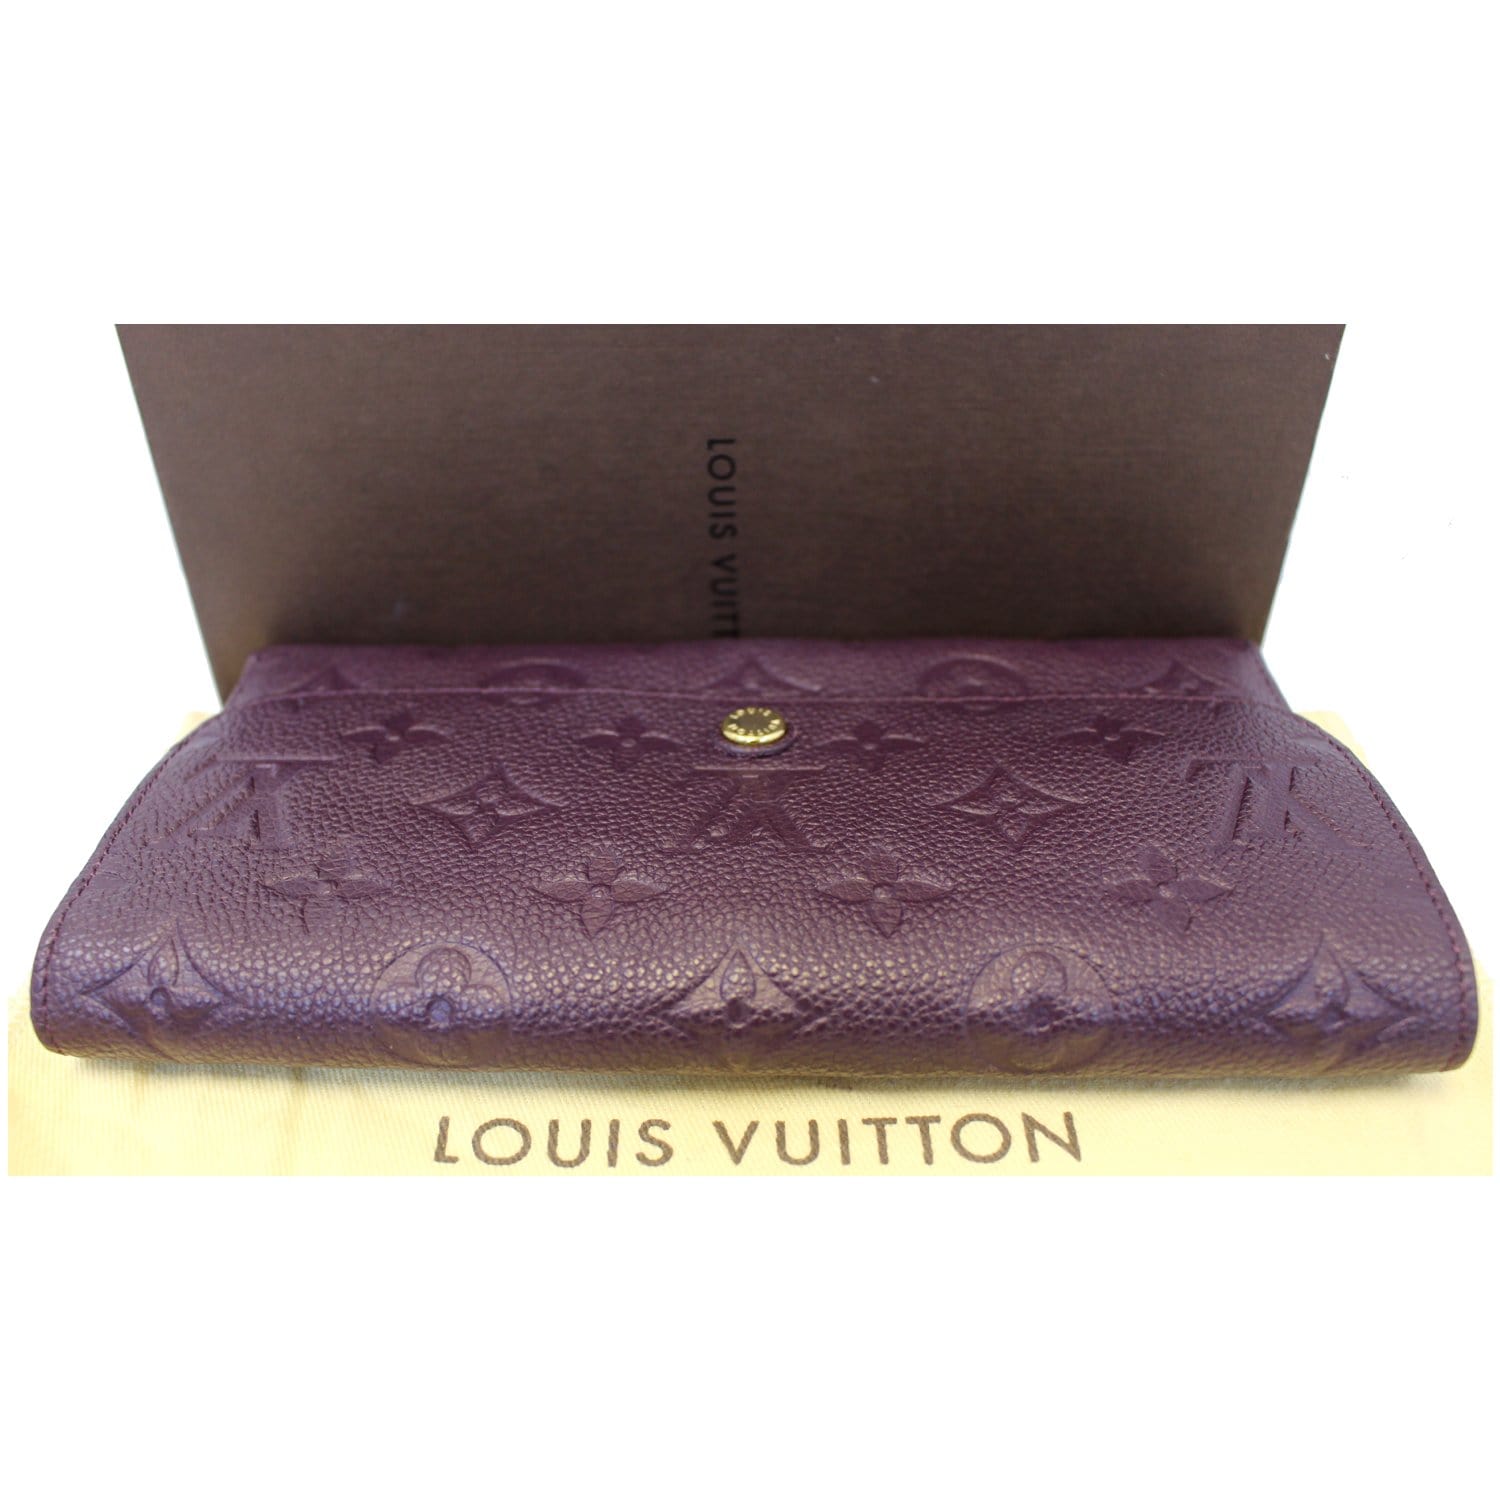 Louis Vuitton Pre-Owned Women's Leather Wallet - Purple - One Size